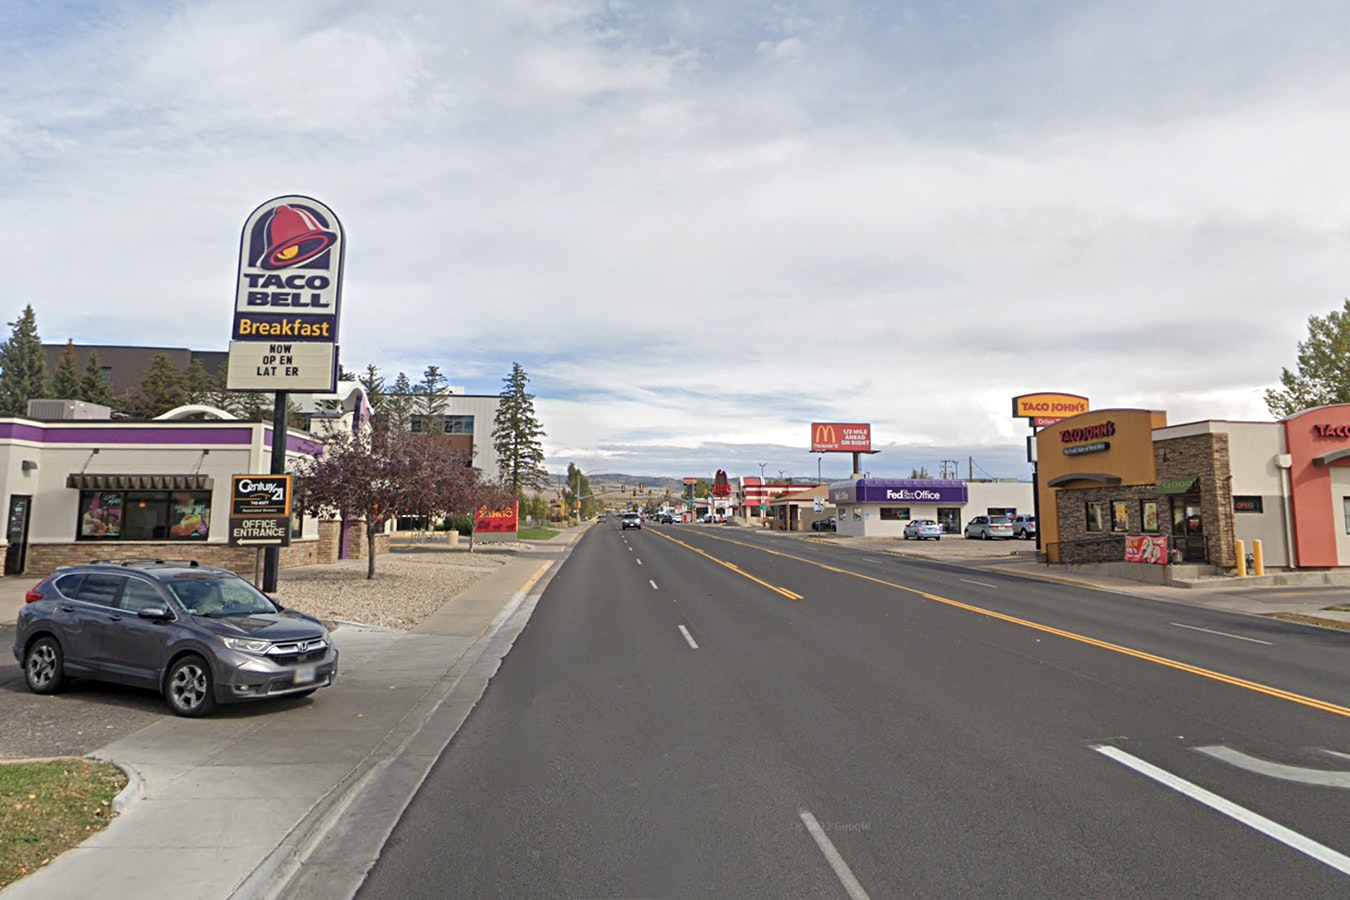 Not only are Taco Bell and Taco John's competitors, in many locations, they're neighbors as well, like in Laramie, where they have outlets across the street from each other along Grand Avenue.